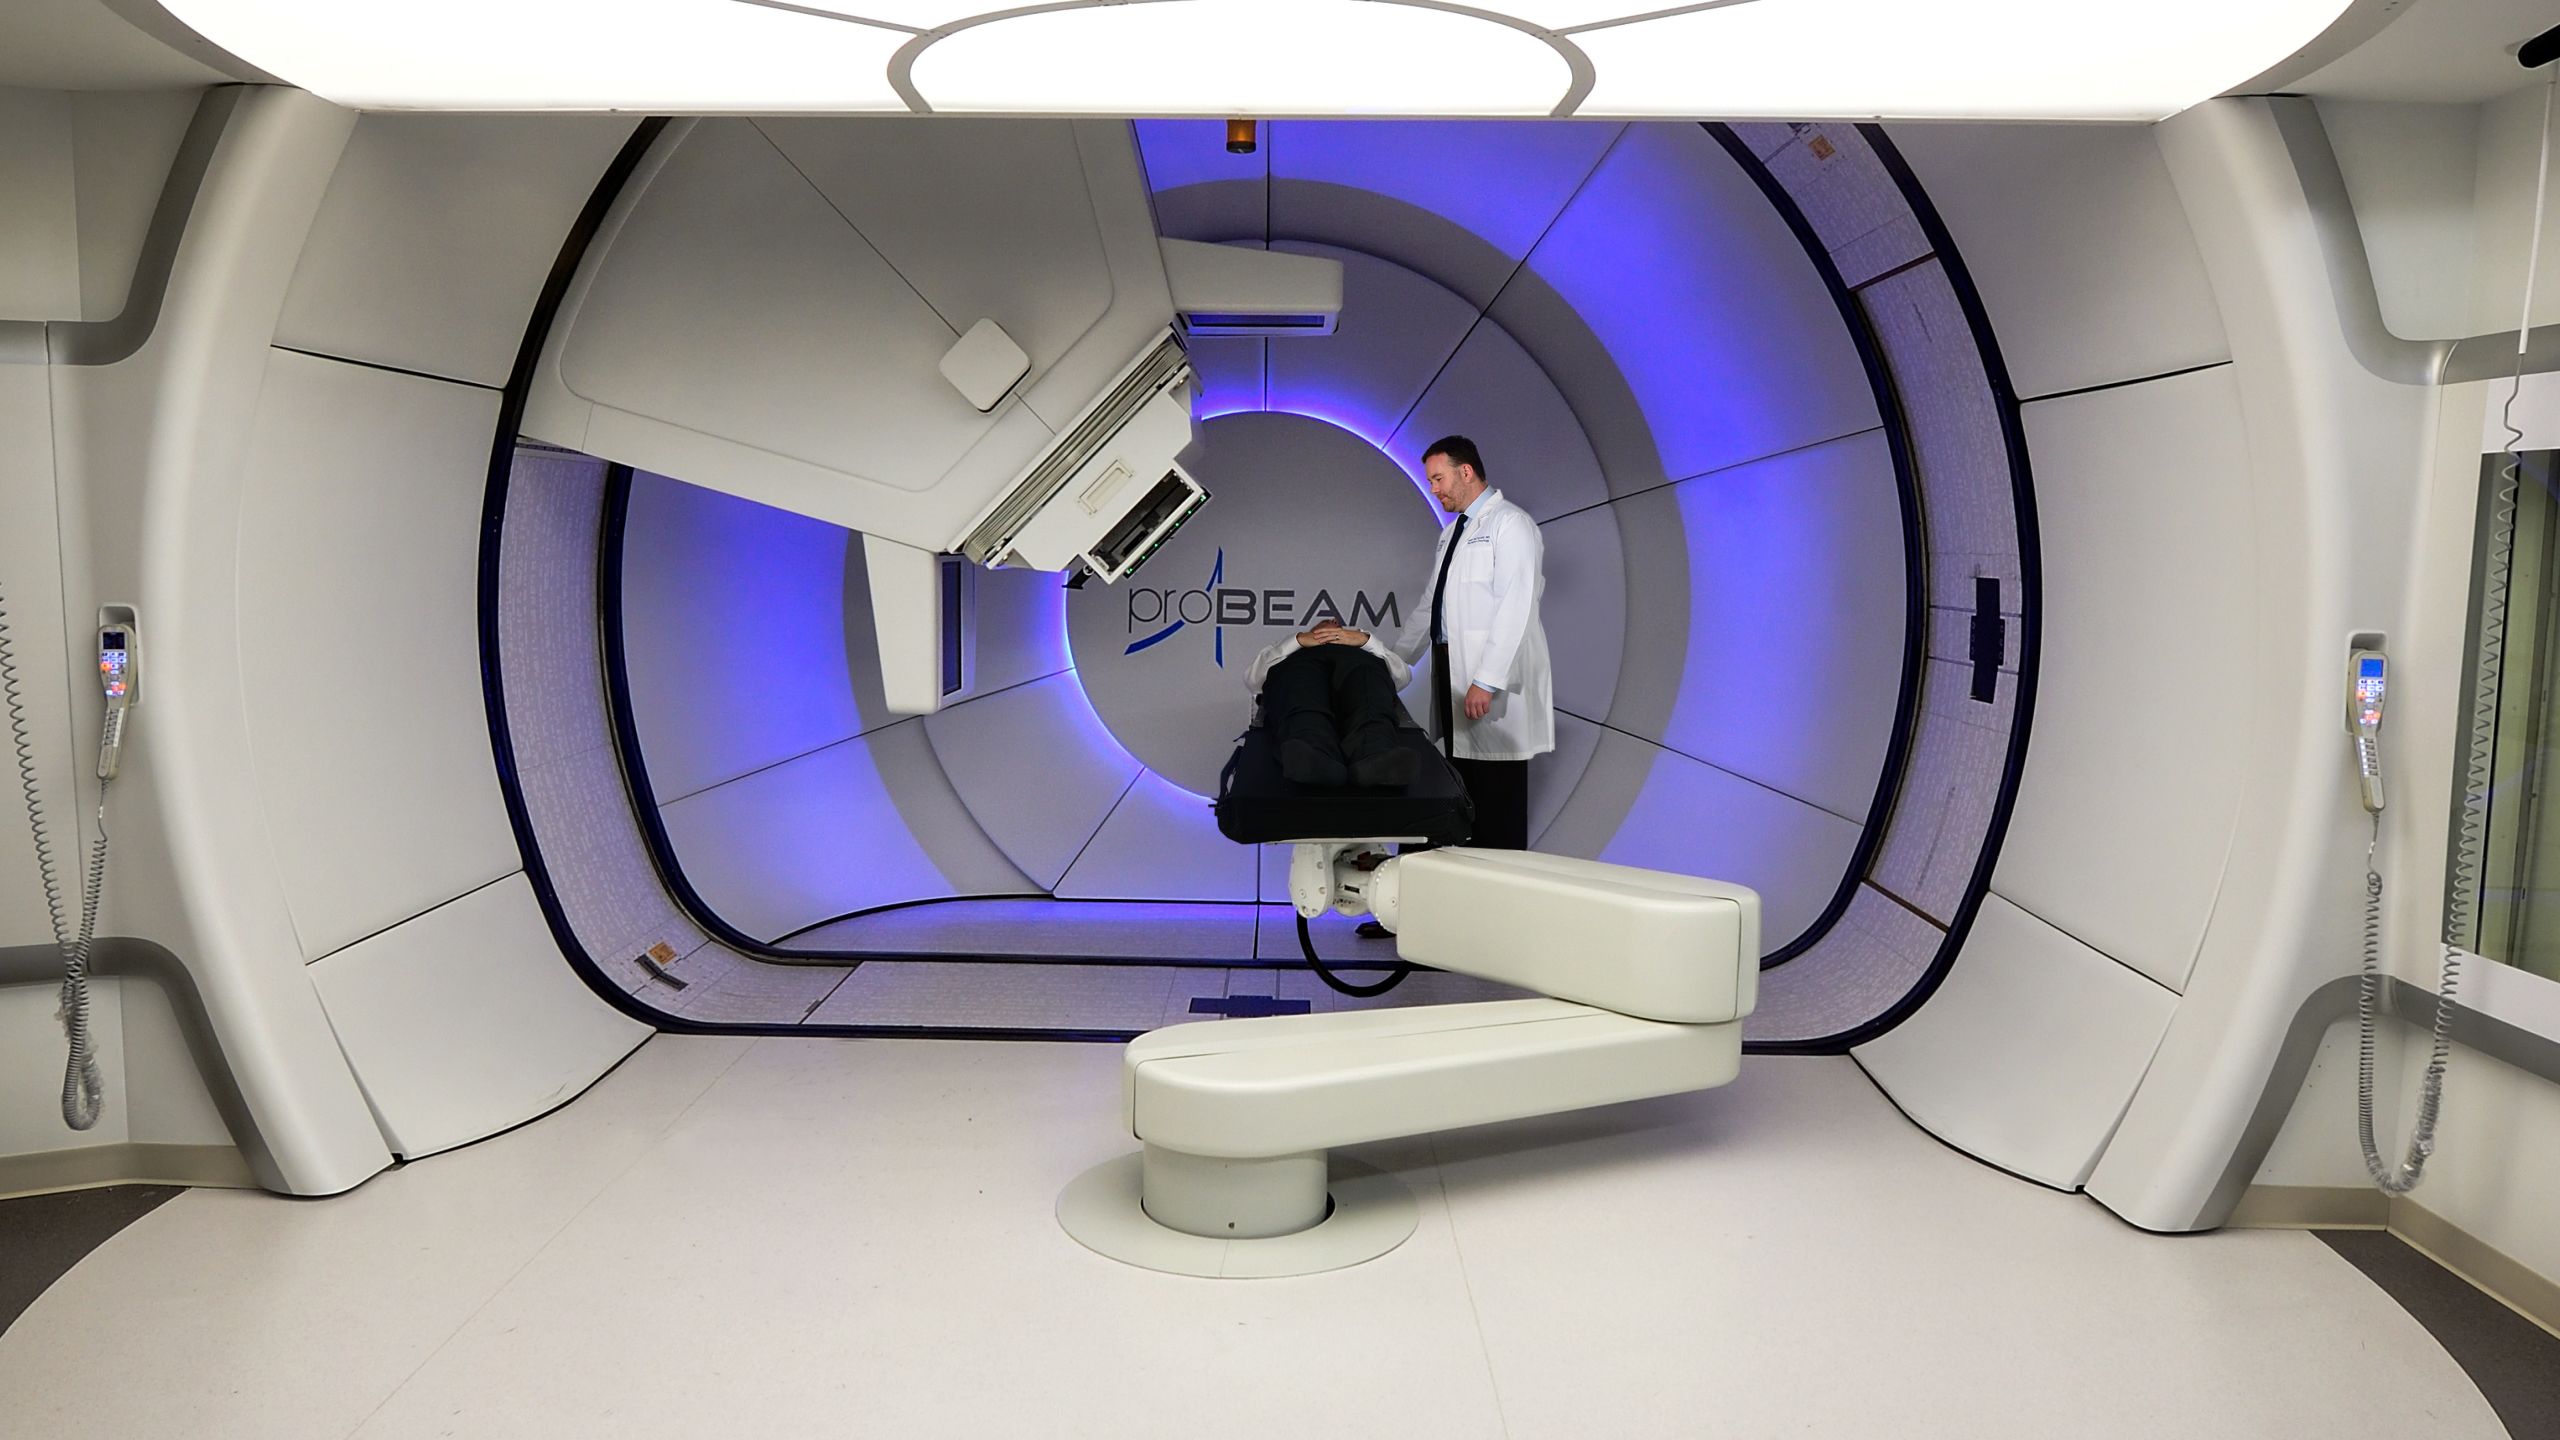 A doctor is standing next to a patient on a treatment table in a very futuristic-looking, circular area where treatment takes place.   